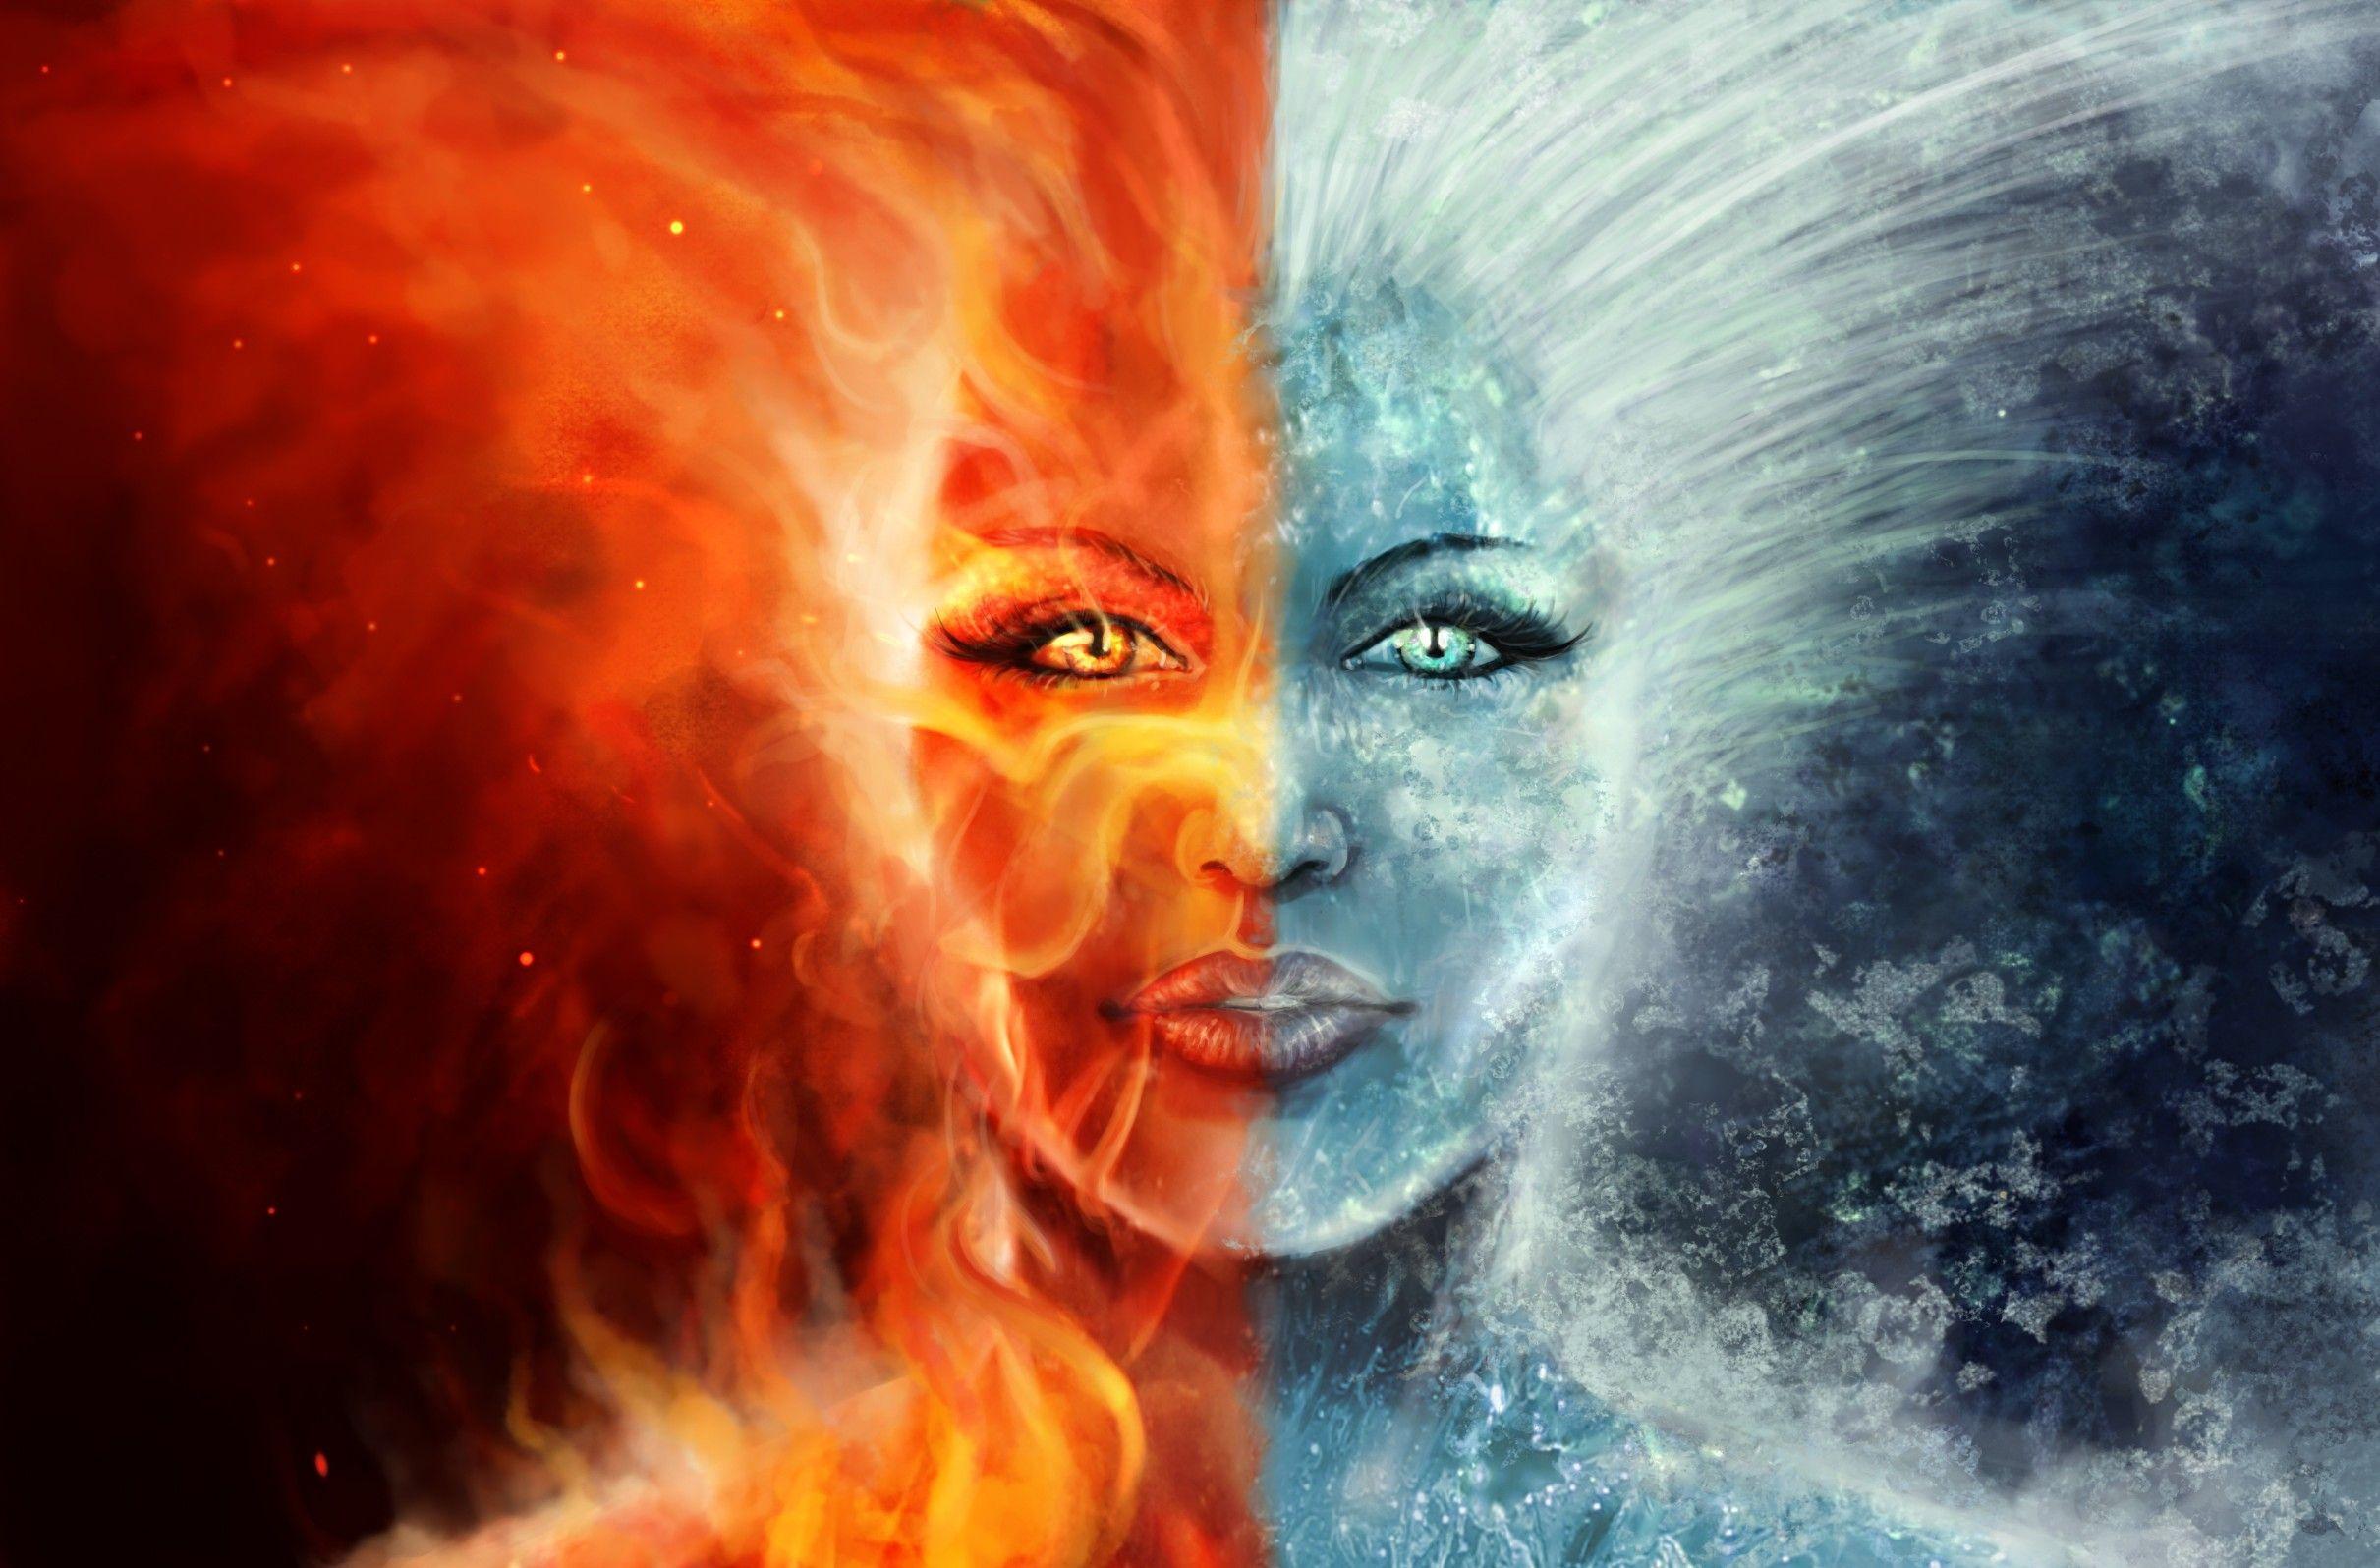 Fire And Ice wallpaper